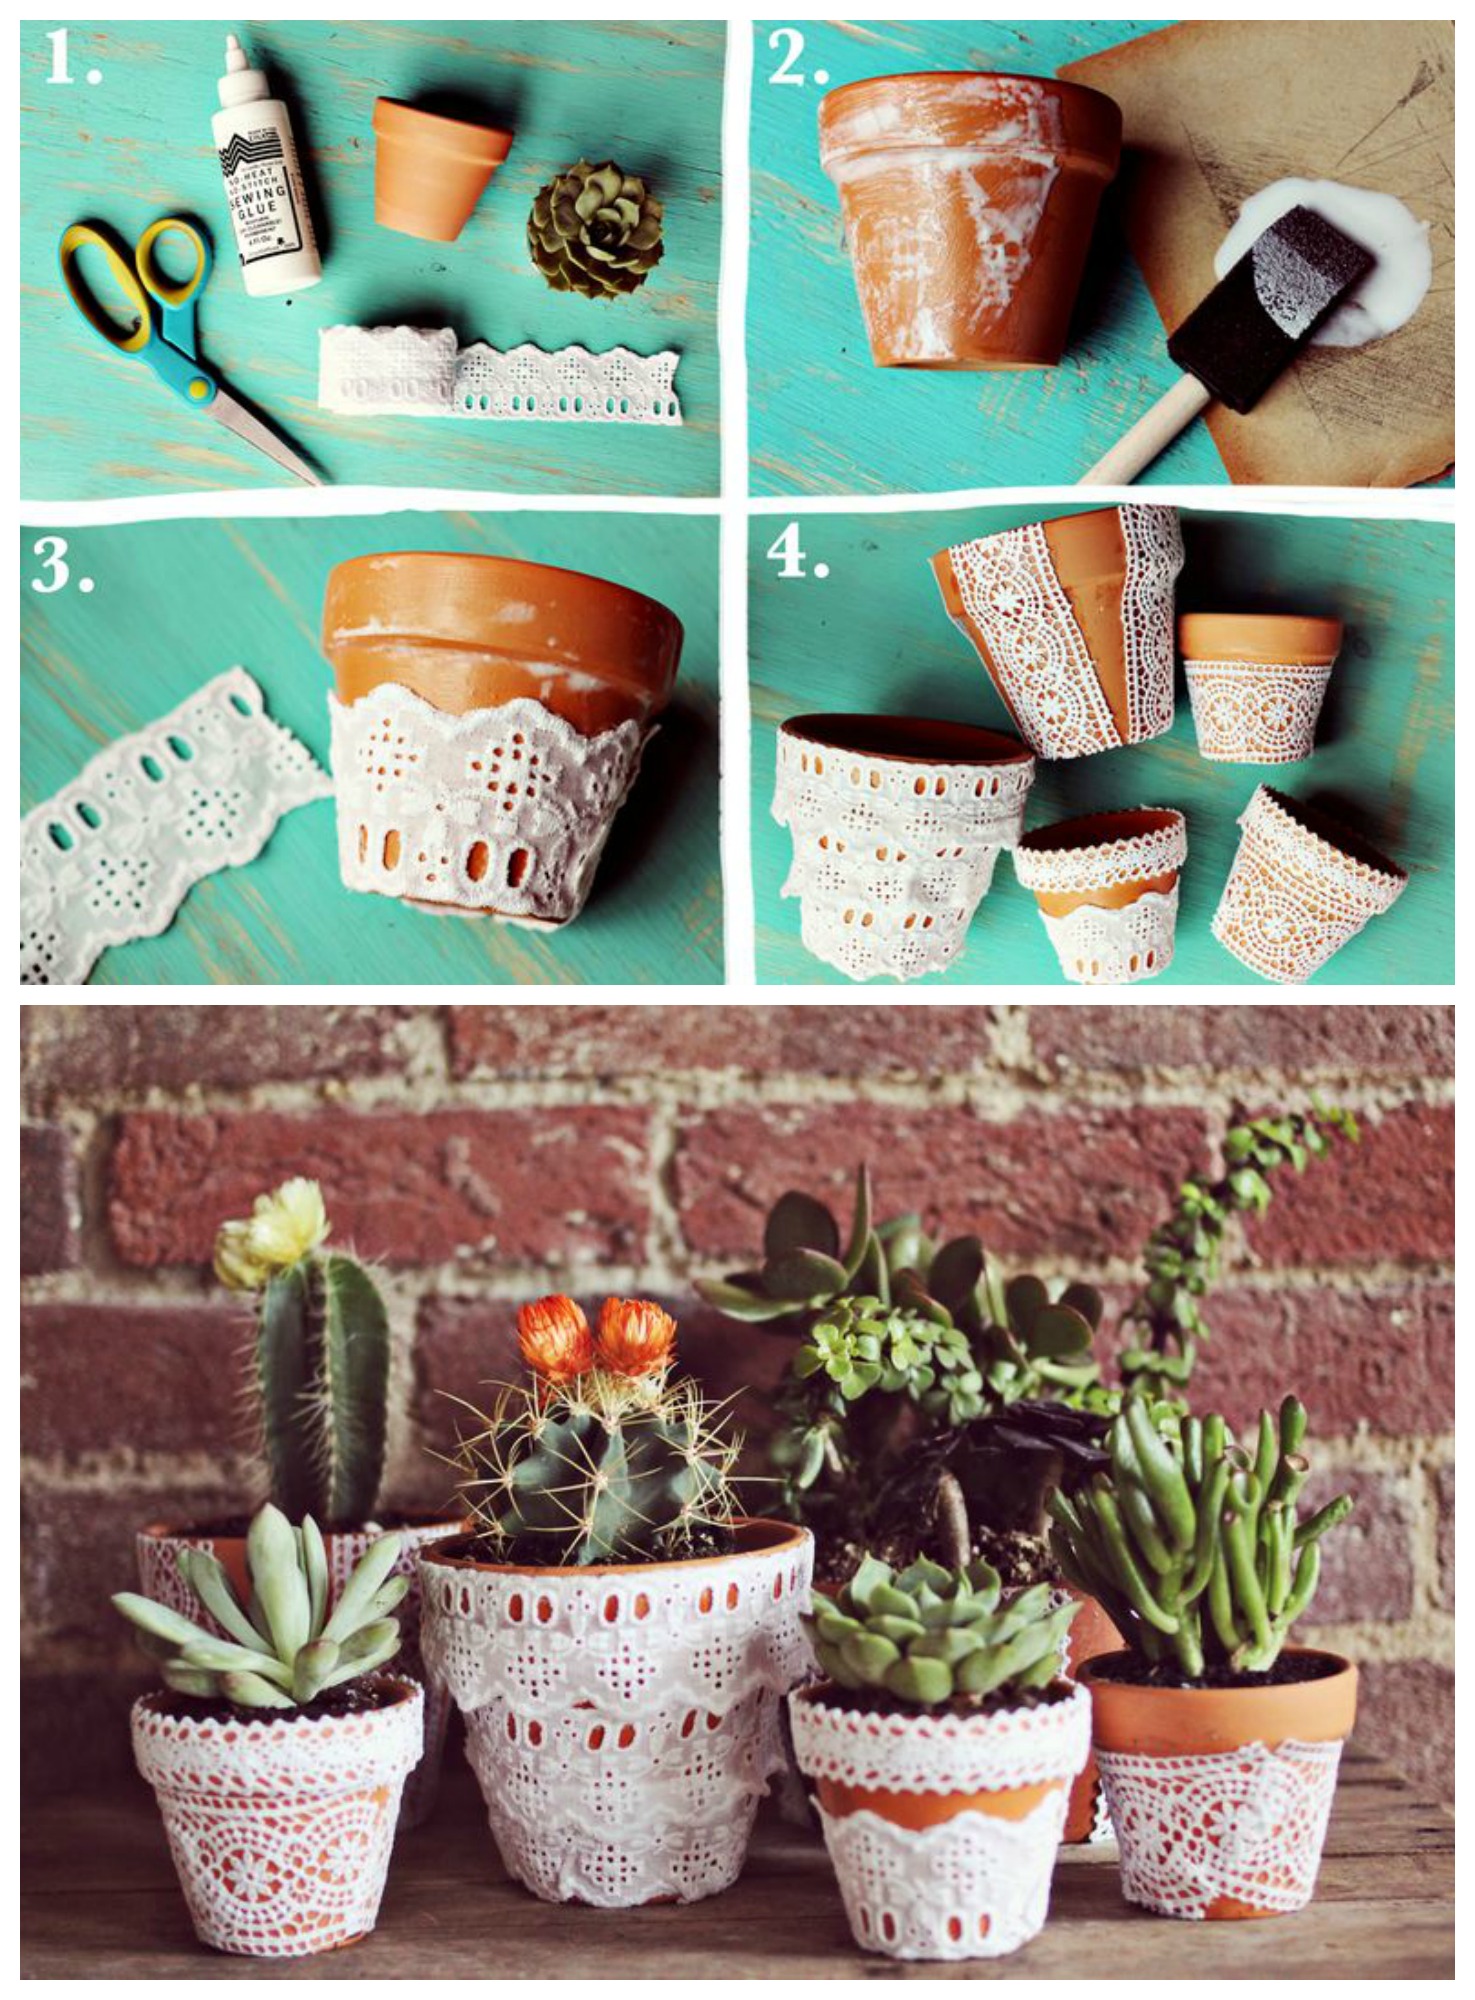 19 Creative Ways Of How To Decorate The Plain Terracotta Pots - Top Dreamer